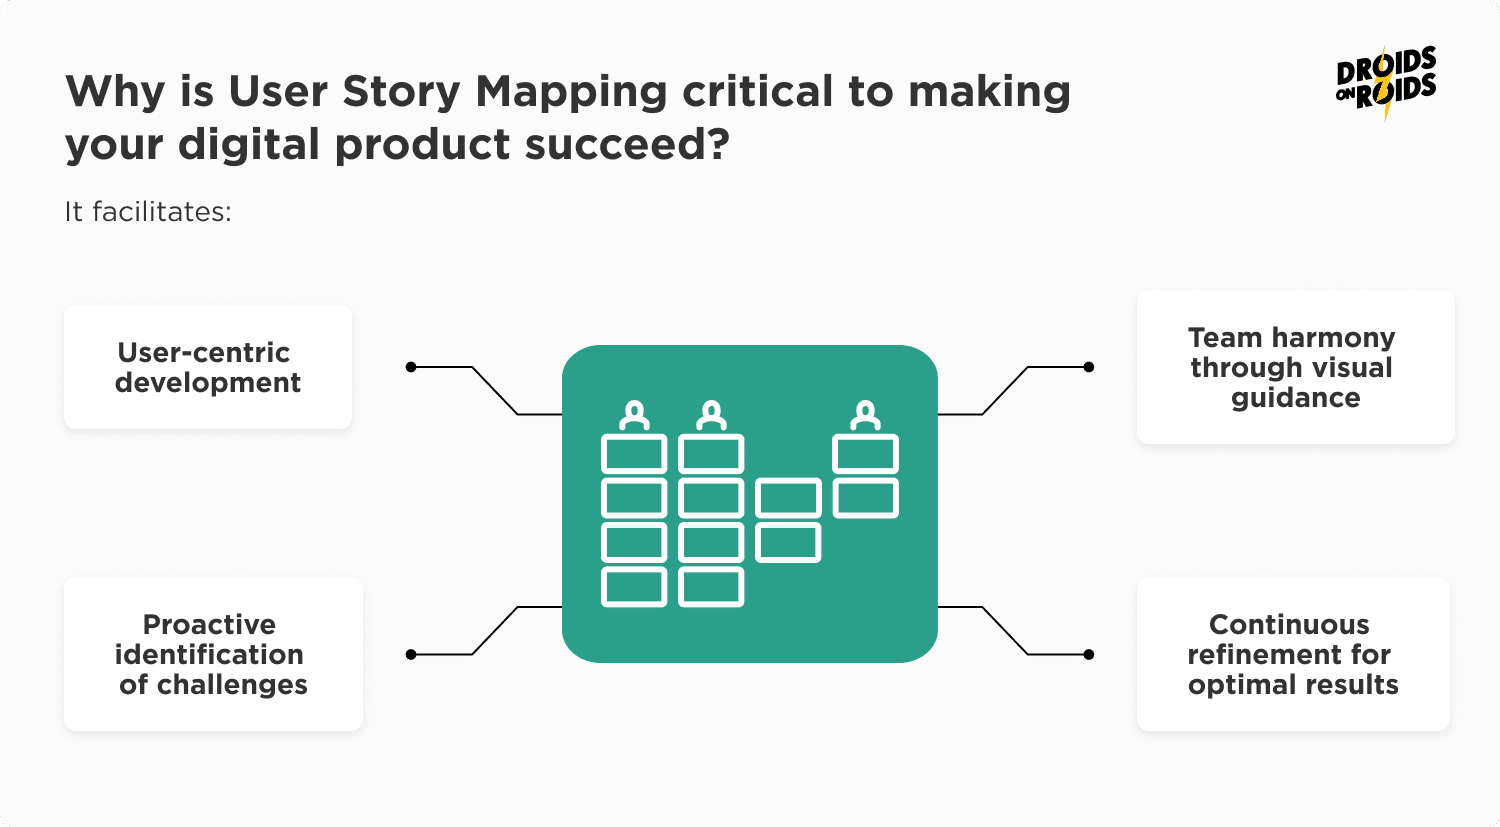 Why User Story Mapping is important